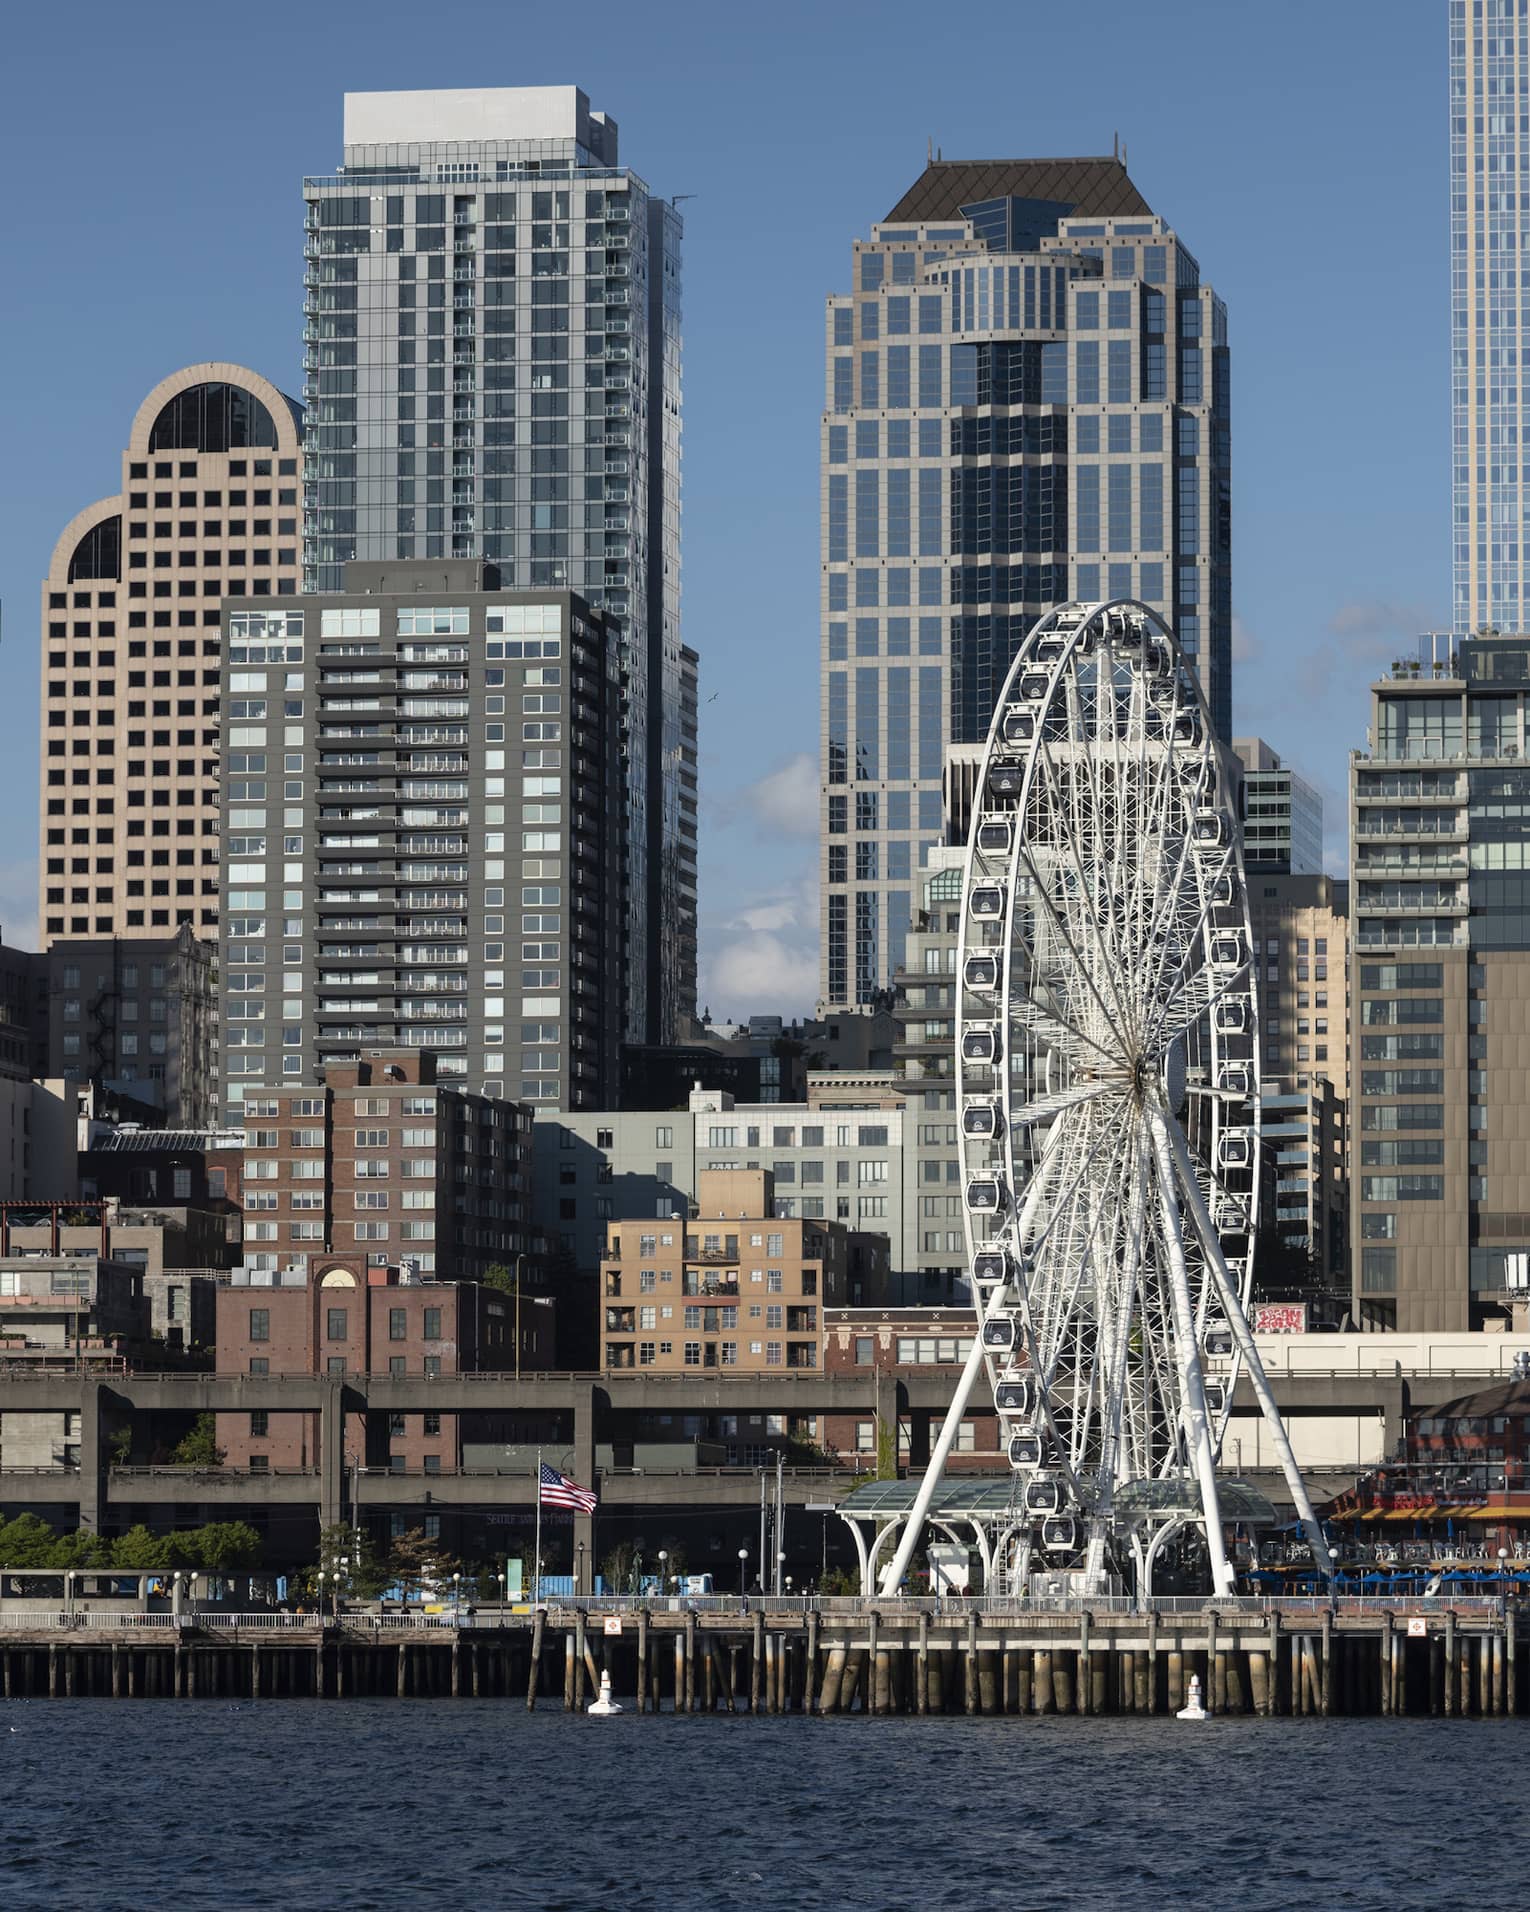 The Seattle Great Wheel stands out among skyscrapers on Elliott Bay